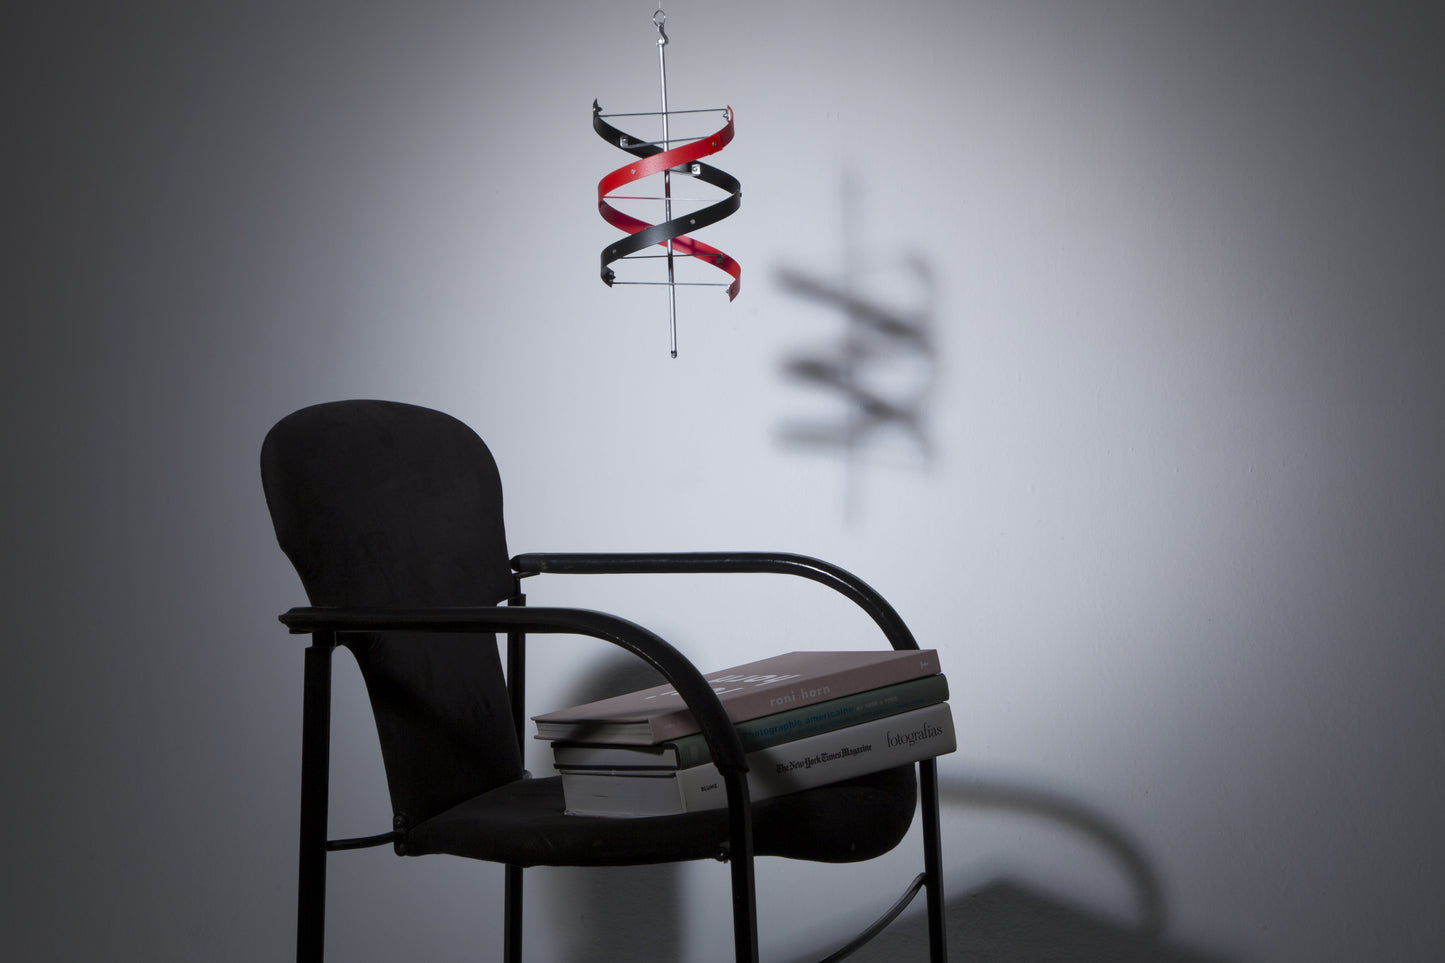 Kinetic Sculpture DNA B&R  beamalevich architecture gift design gift art gift